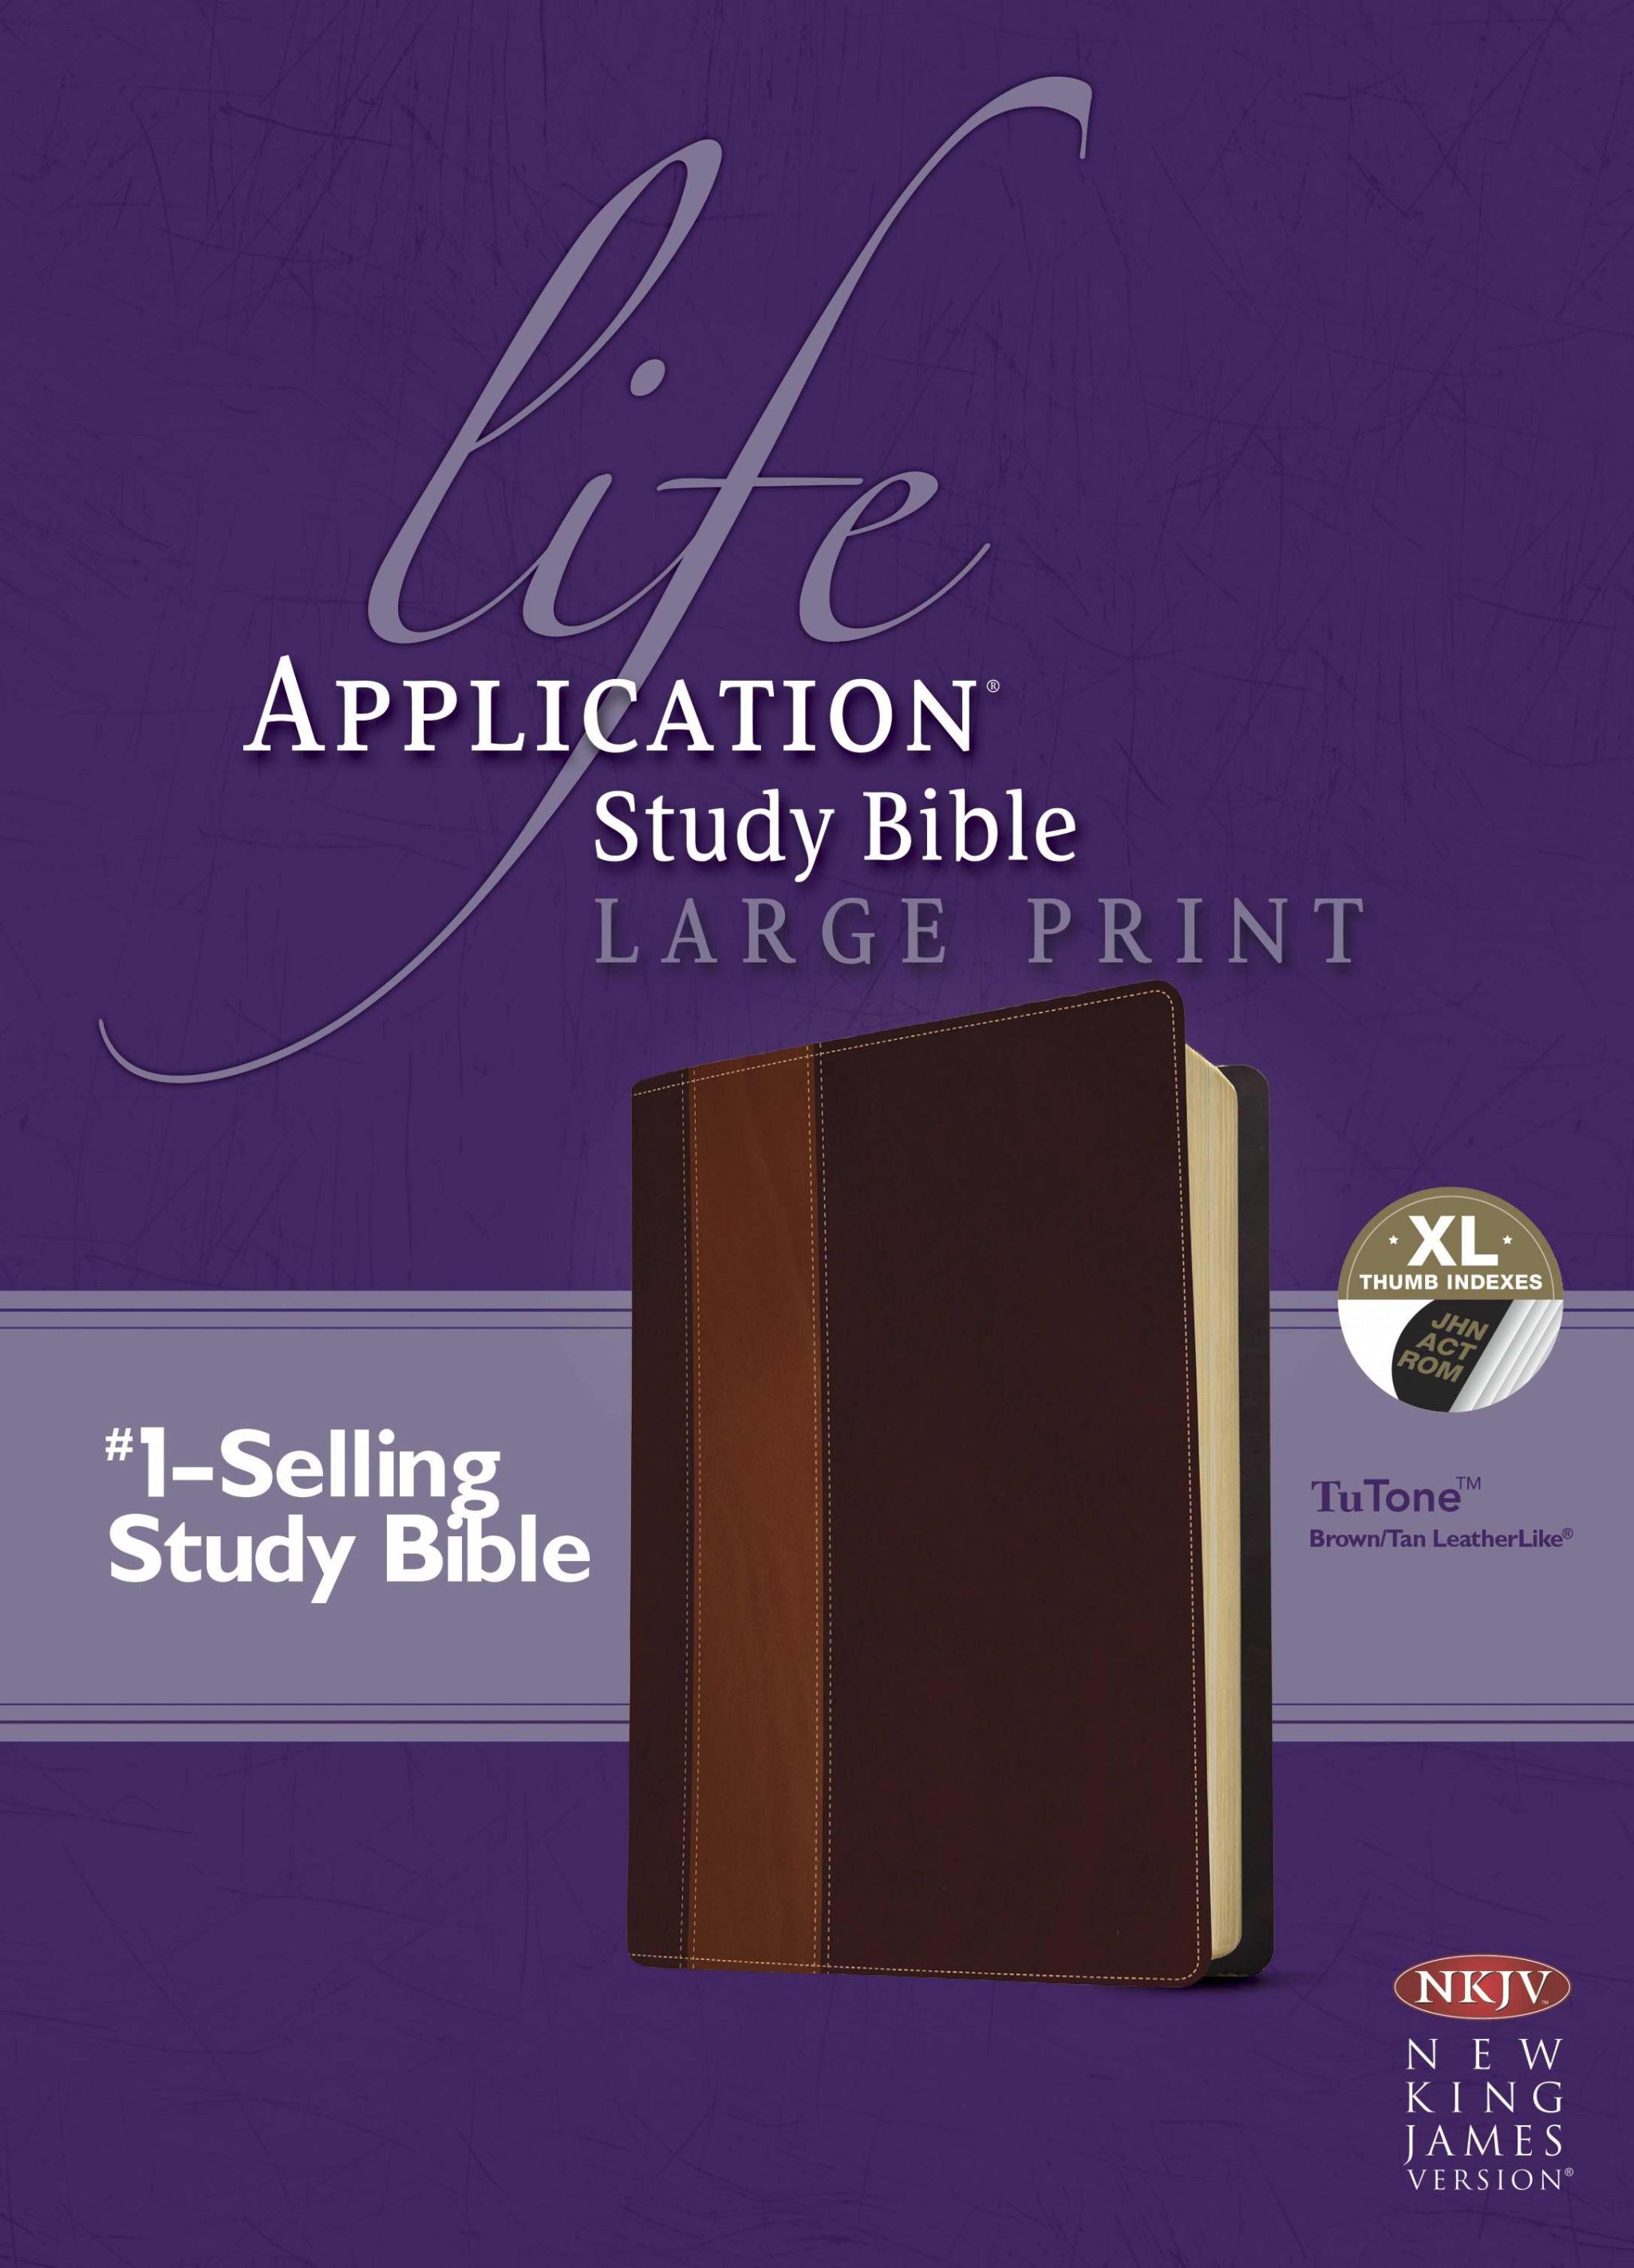 Image of NKJV Life Application Study Bible, Large Print, Imitation Leather, Brown/Tan, Ribbon Marker, Cross Reference, Concordance other